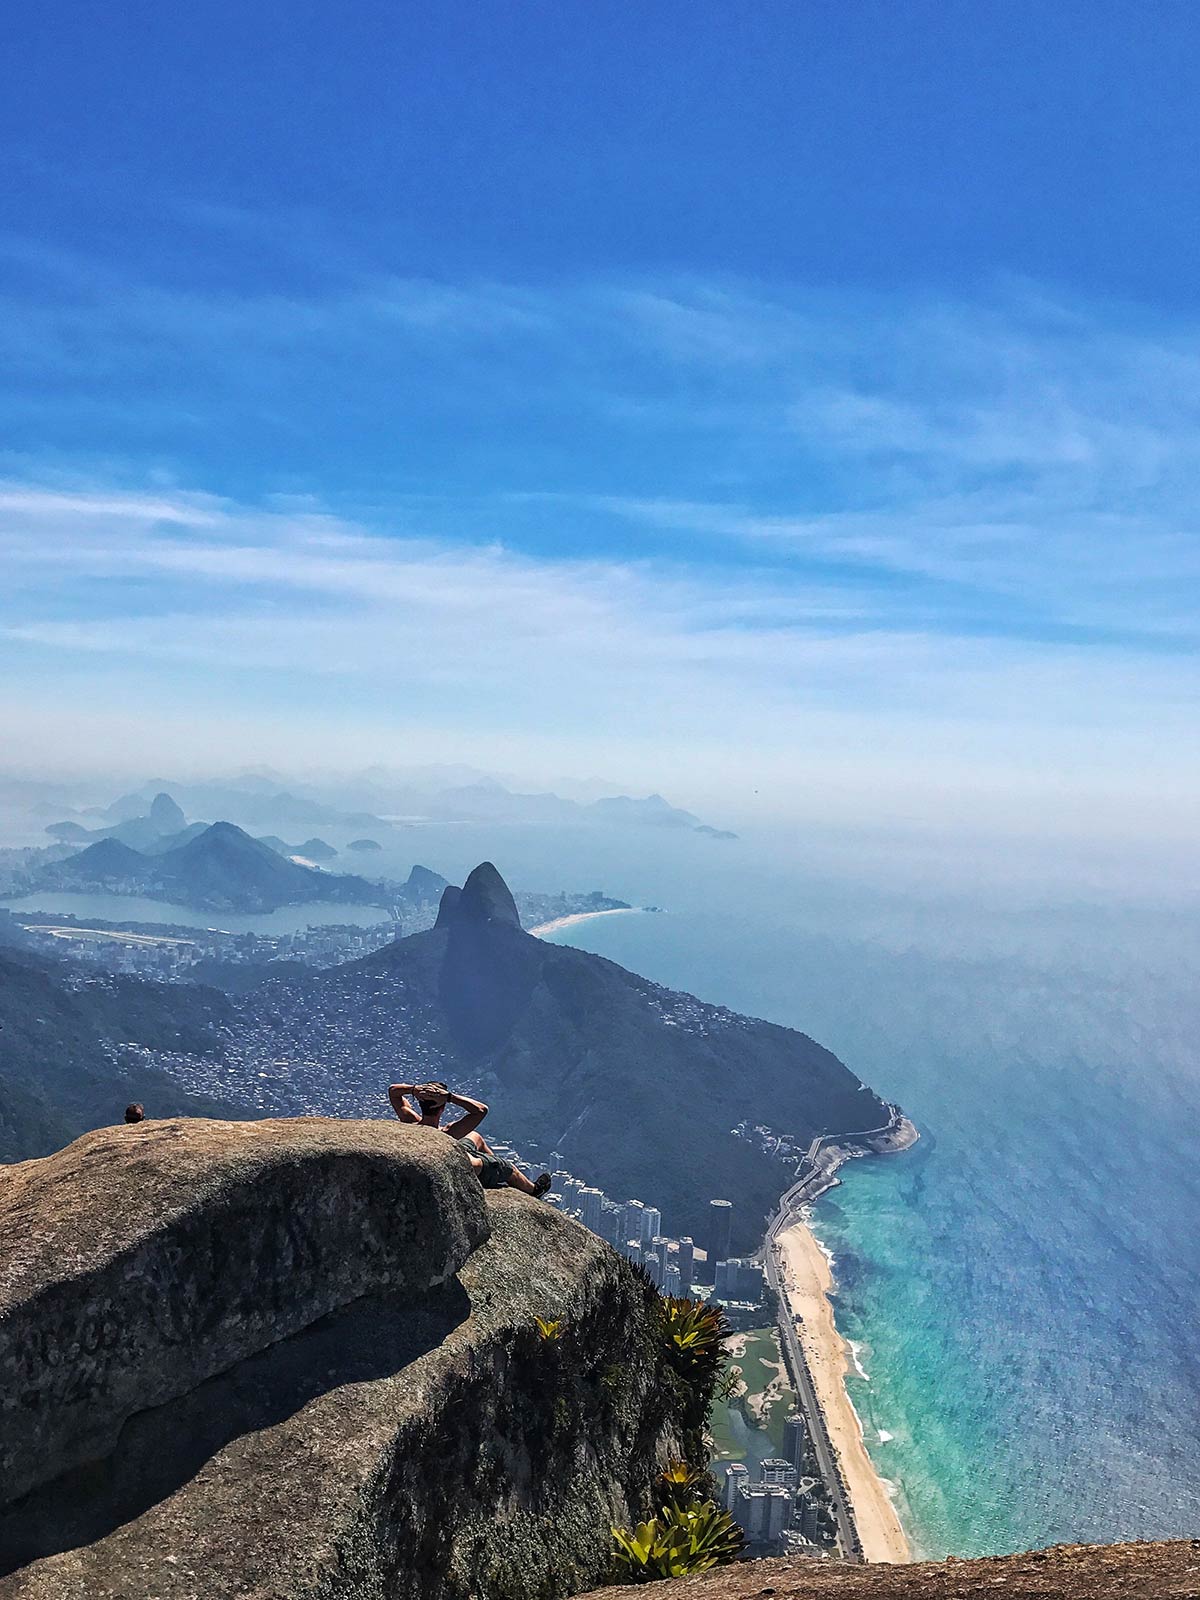 David Simpson seated at the top of the mountain in Gavea, Brazil. Climbing the wrong mountain, the best mistake I've made